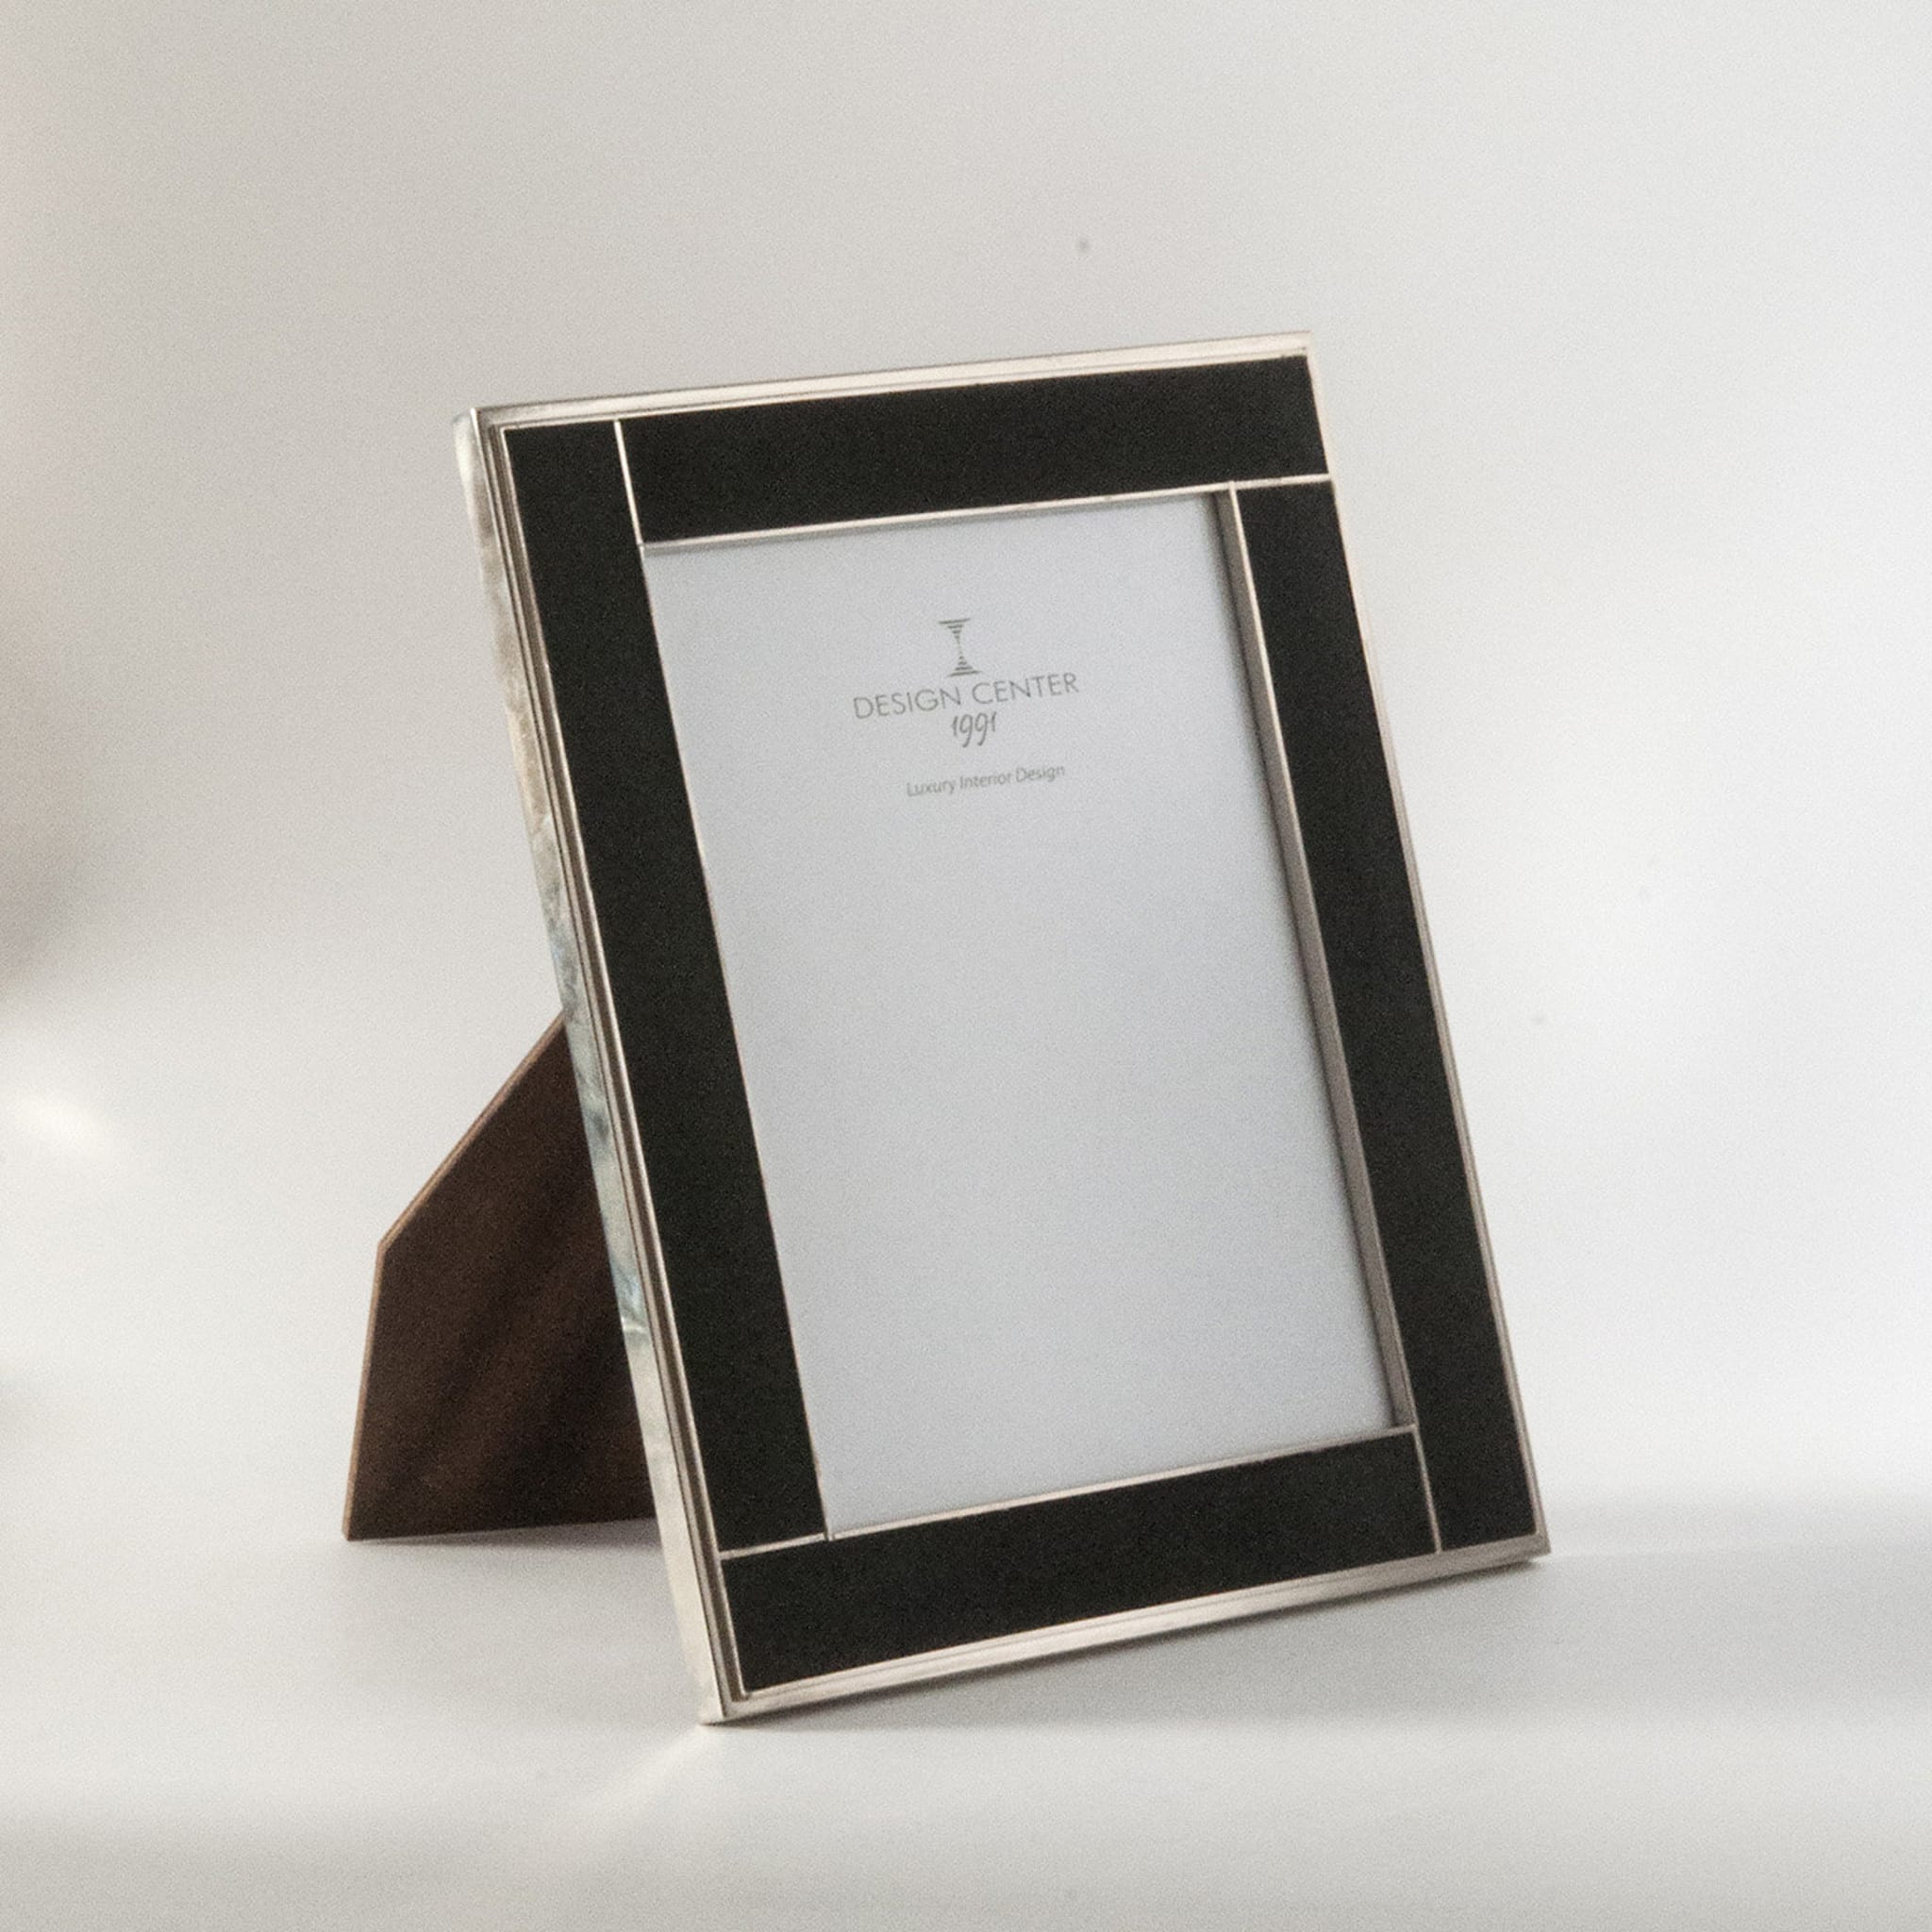 Galucharme Black Picture Frame by Nino Basso  - Alternative view 1